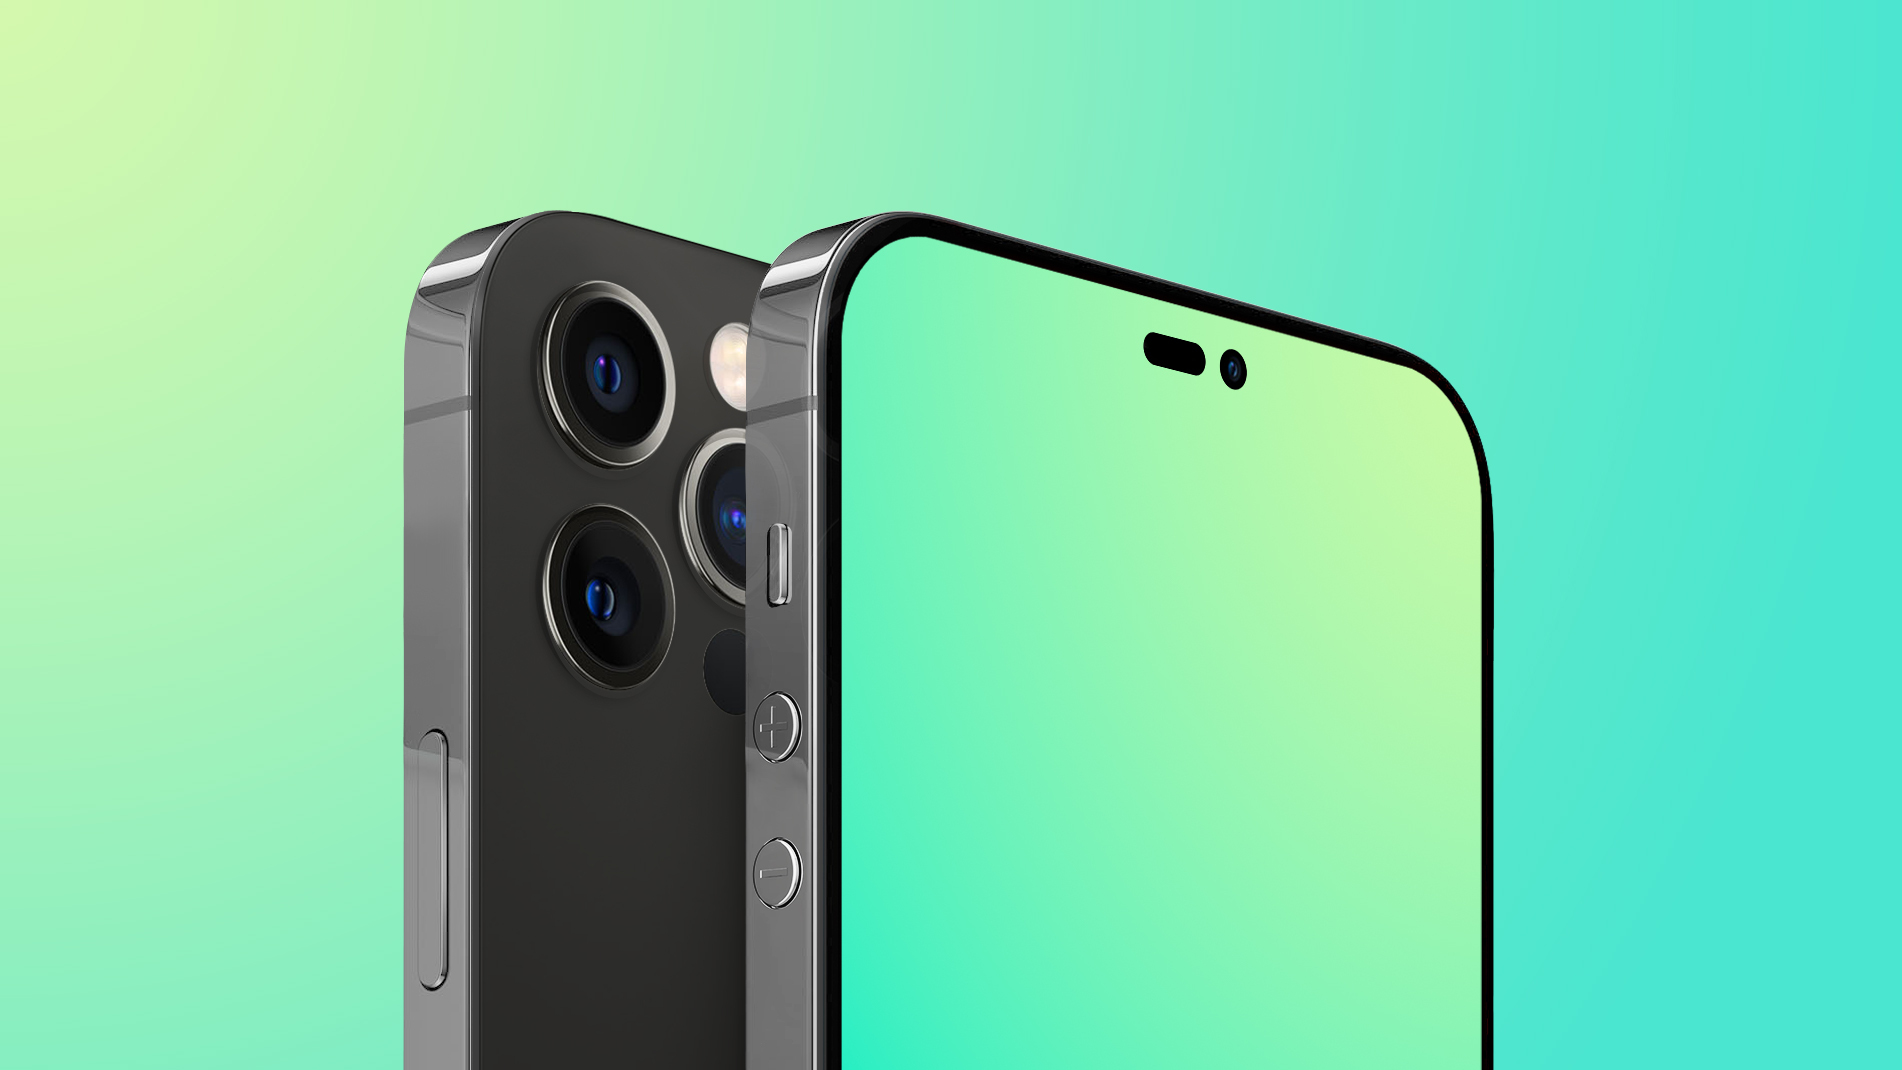 Kuo: iPhone 14 Models Likely to Feature Upgraded Front Camera With Autofocus